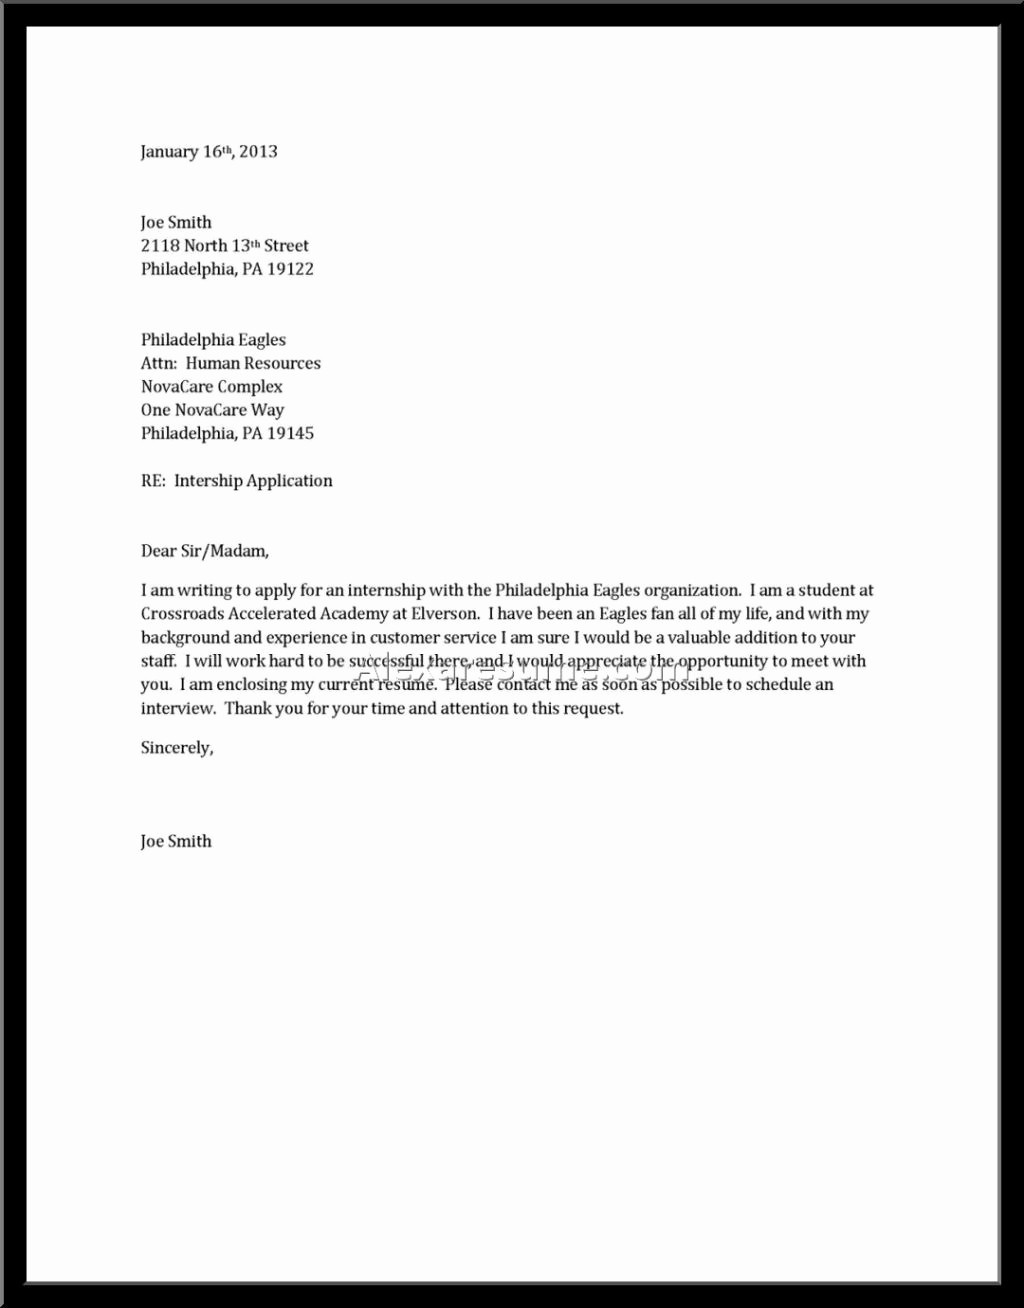 Sample Resume and Cover Letter Luxury Best Good Cover Letter for Resume – Letter format Writing